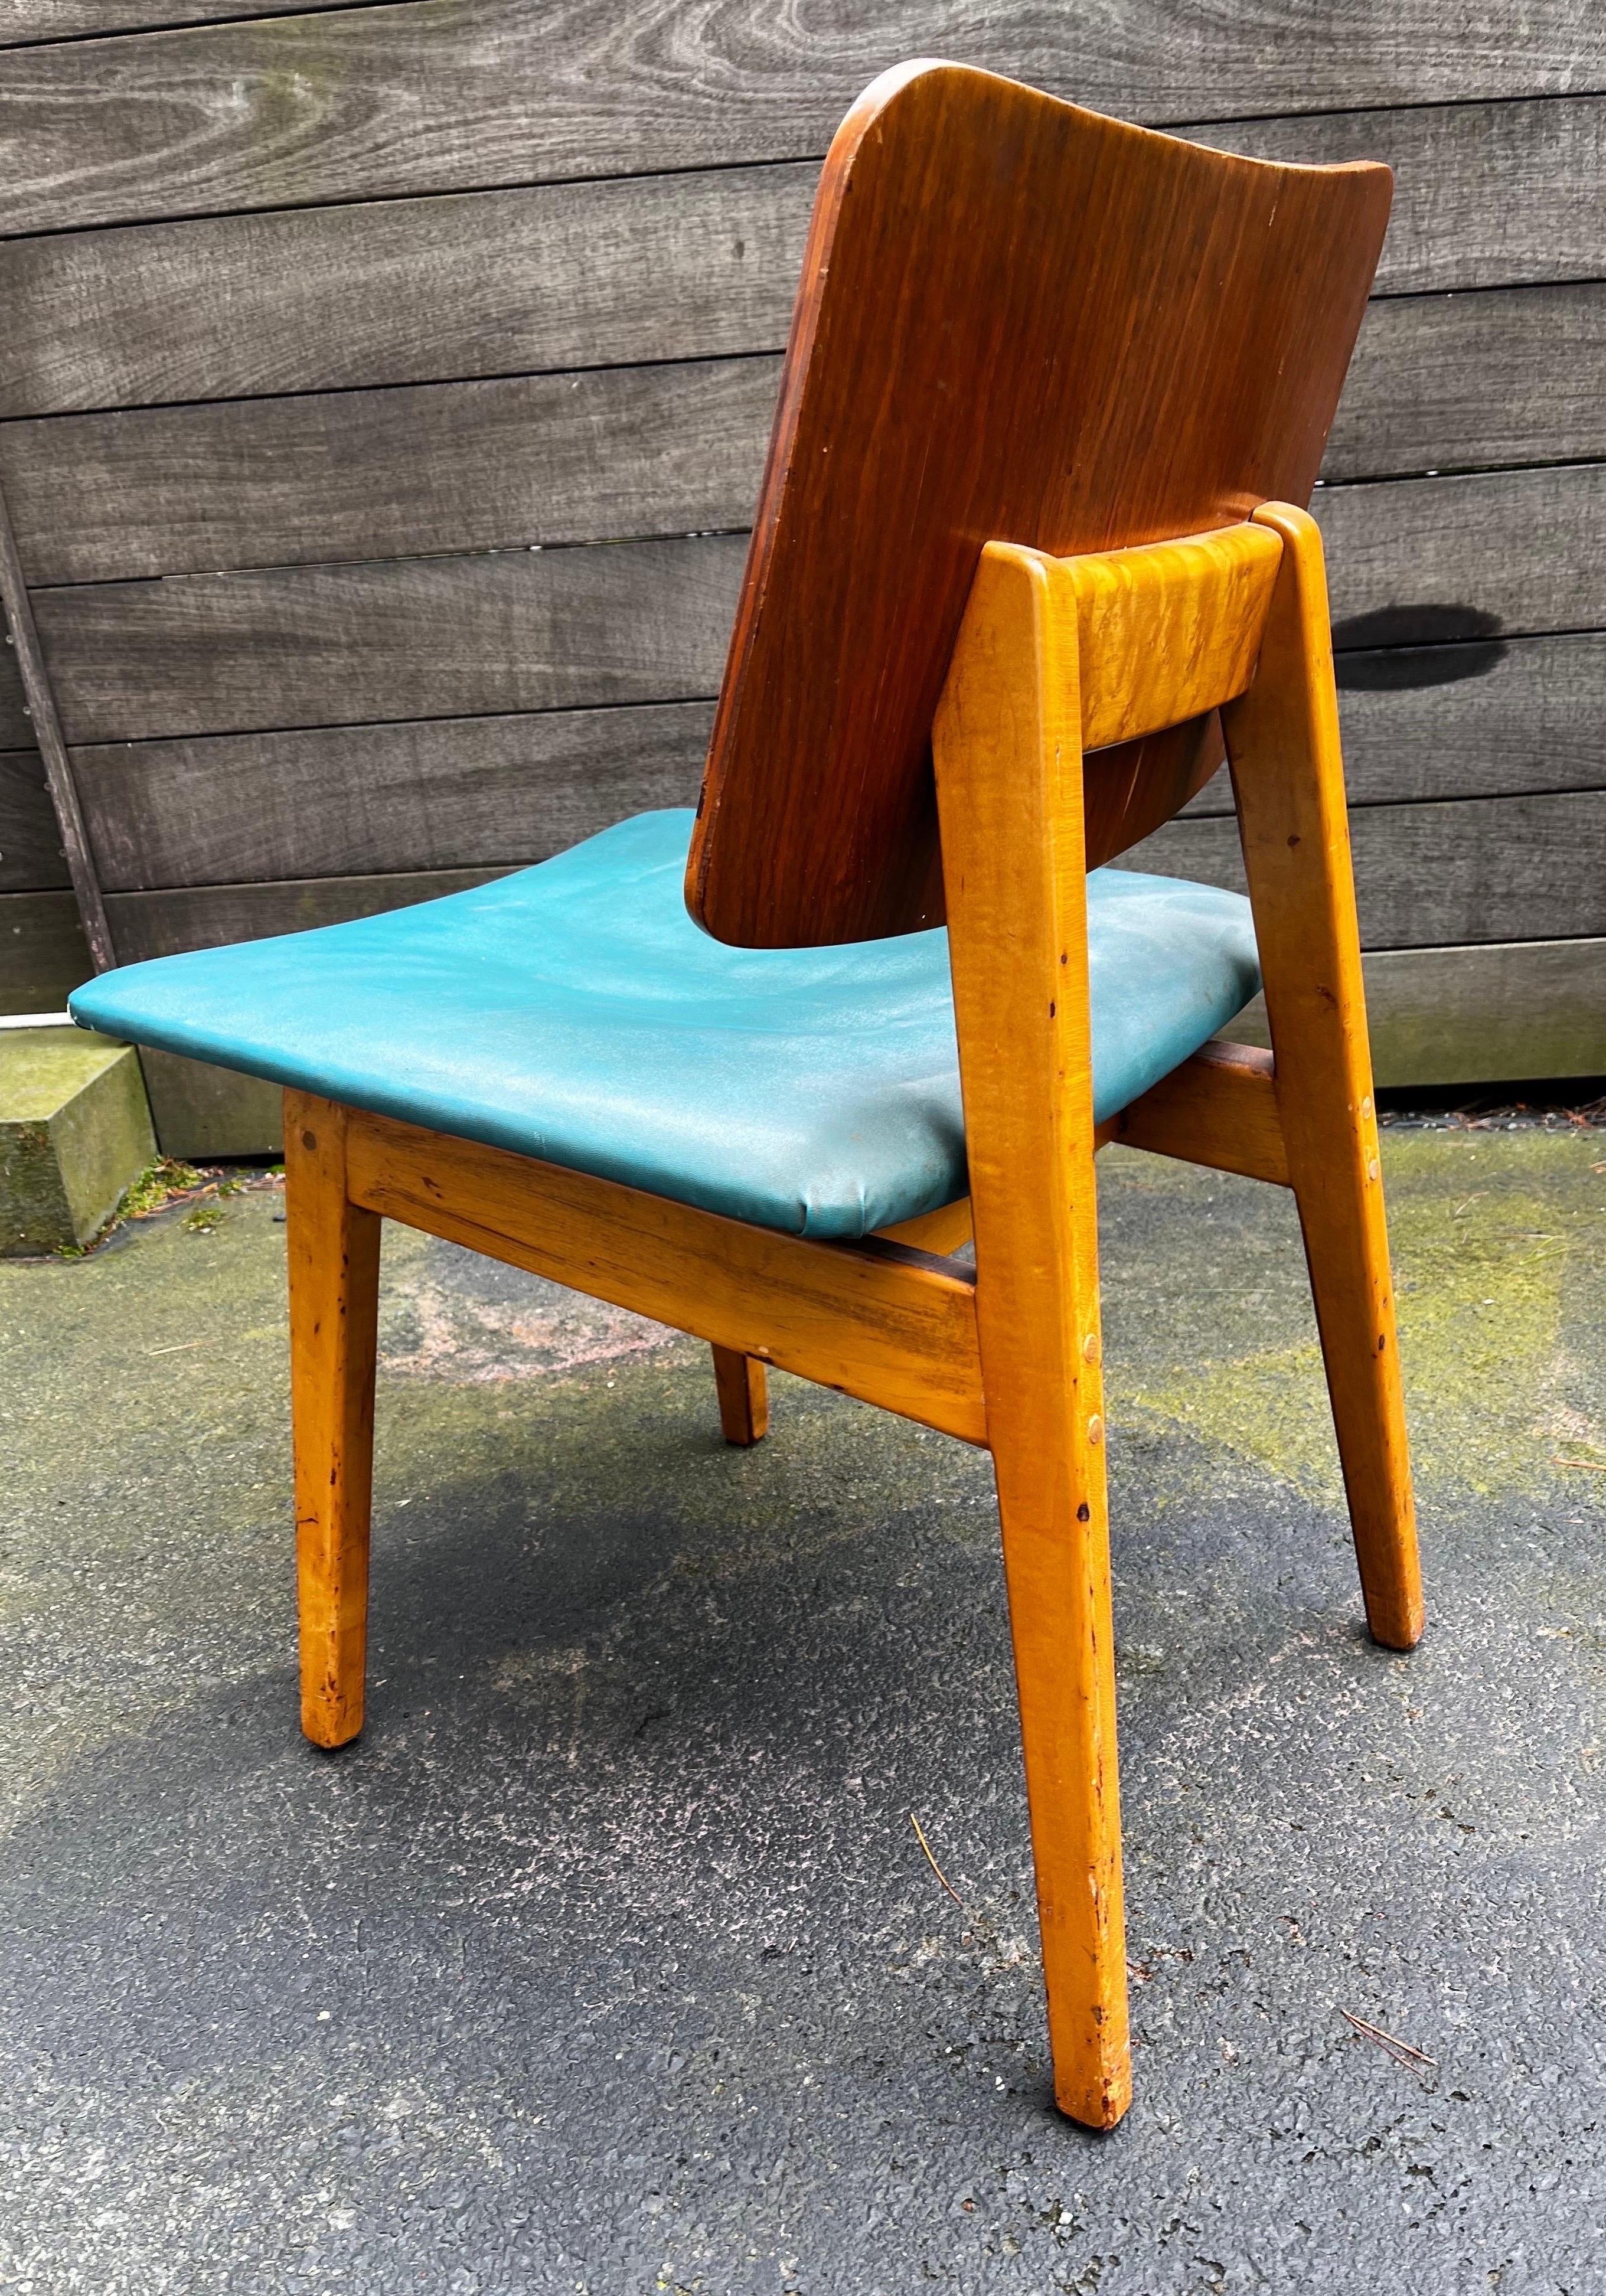 Jens Risom Side Chair c. 1940

maple frame with walnut back and original vinyl seat cover
all in original condition - untouched  - original label on the bottom 

have not been able to find another example of this exact chair
Chair was aquired form